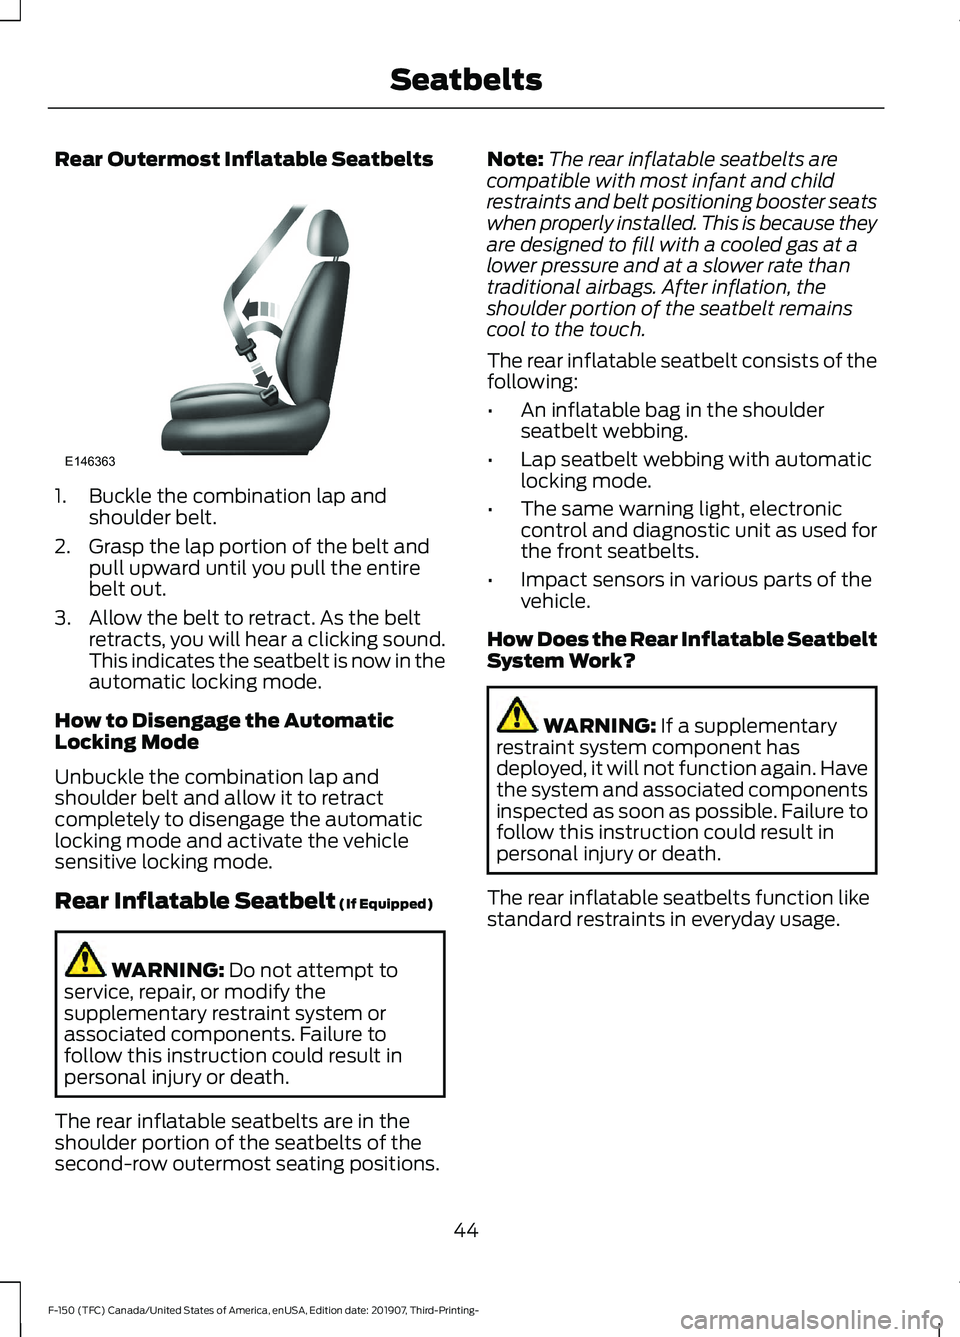 FORD F-150 2020 Service Manual Rear Outermost Inflatable Seatbelts
1. Buckle the combination lap and
shoulder belt.
2. Grasp the lap portion of the belt and pull upward until you pull the entire
belt out.
3. Allow the belt to retra